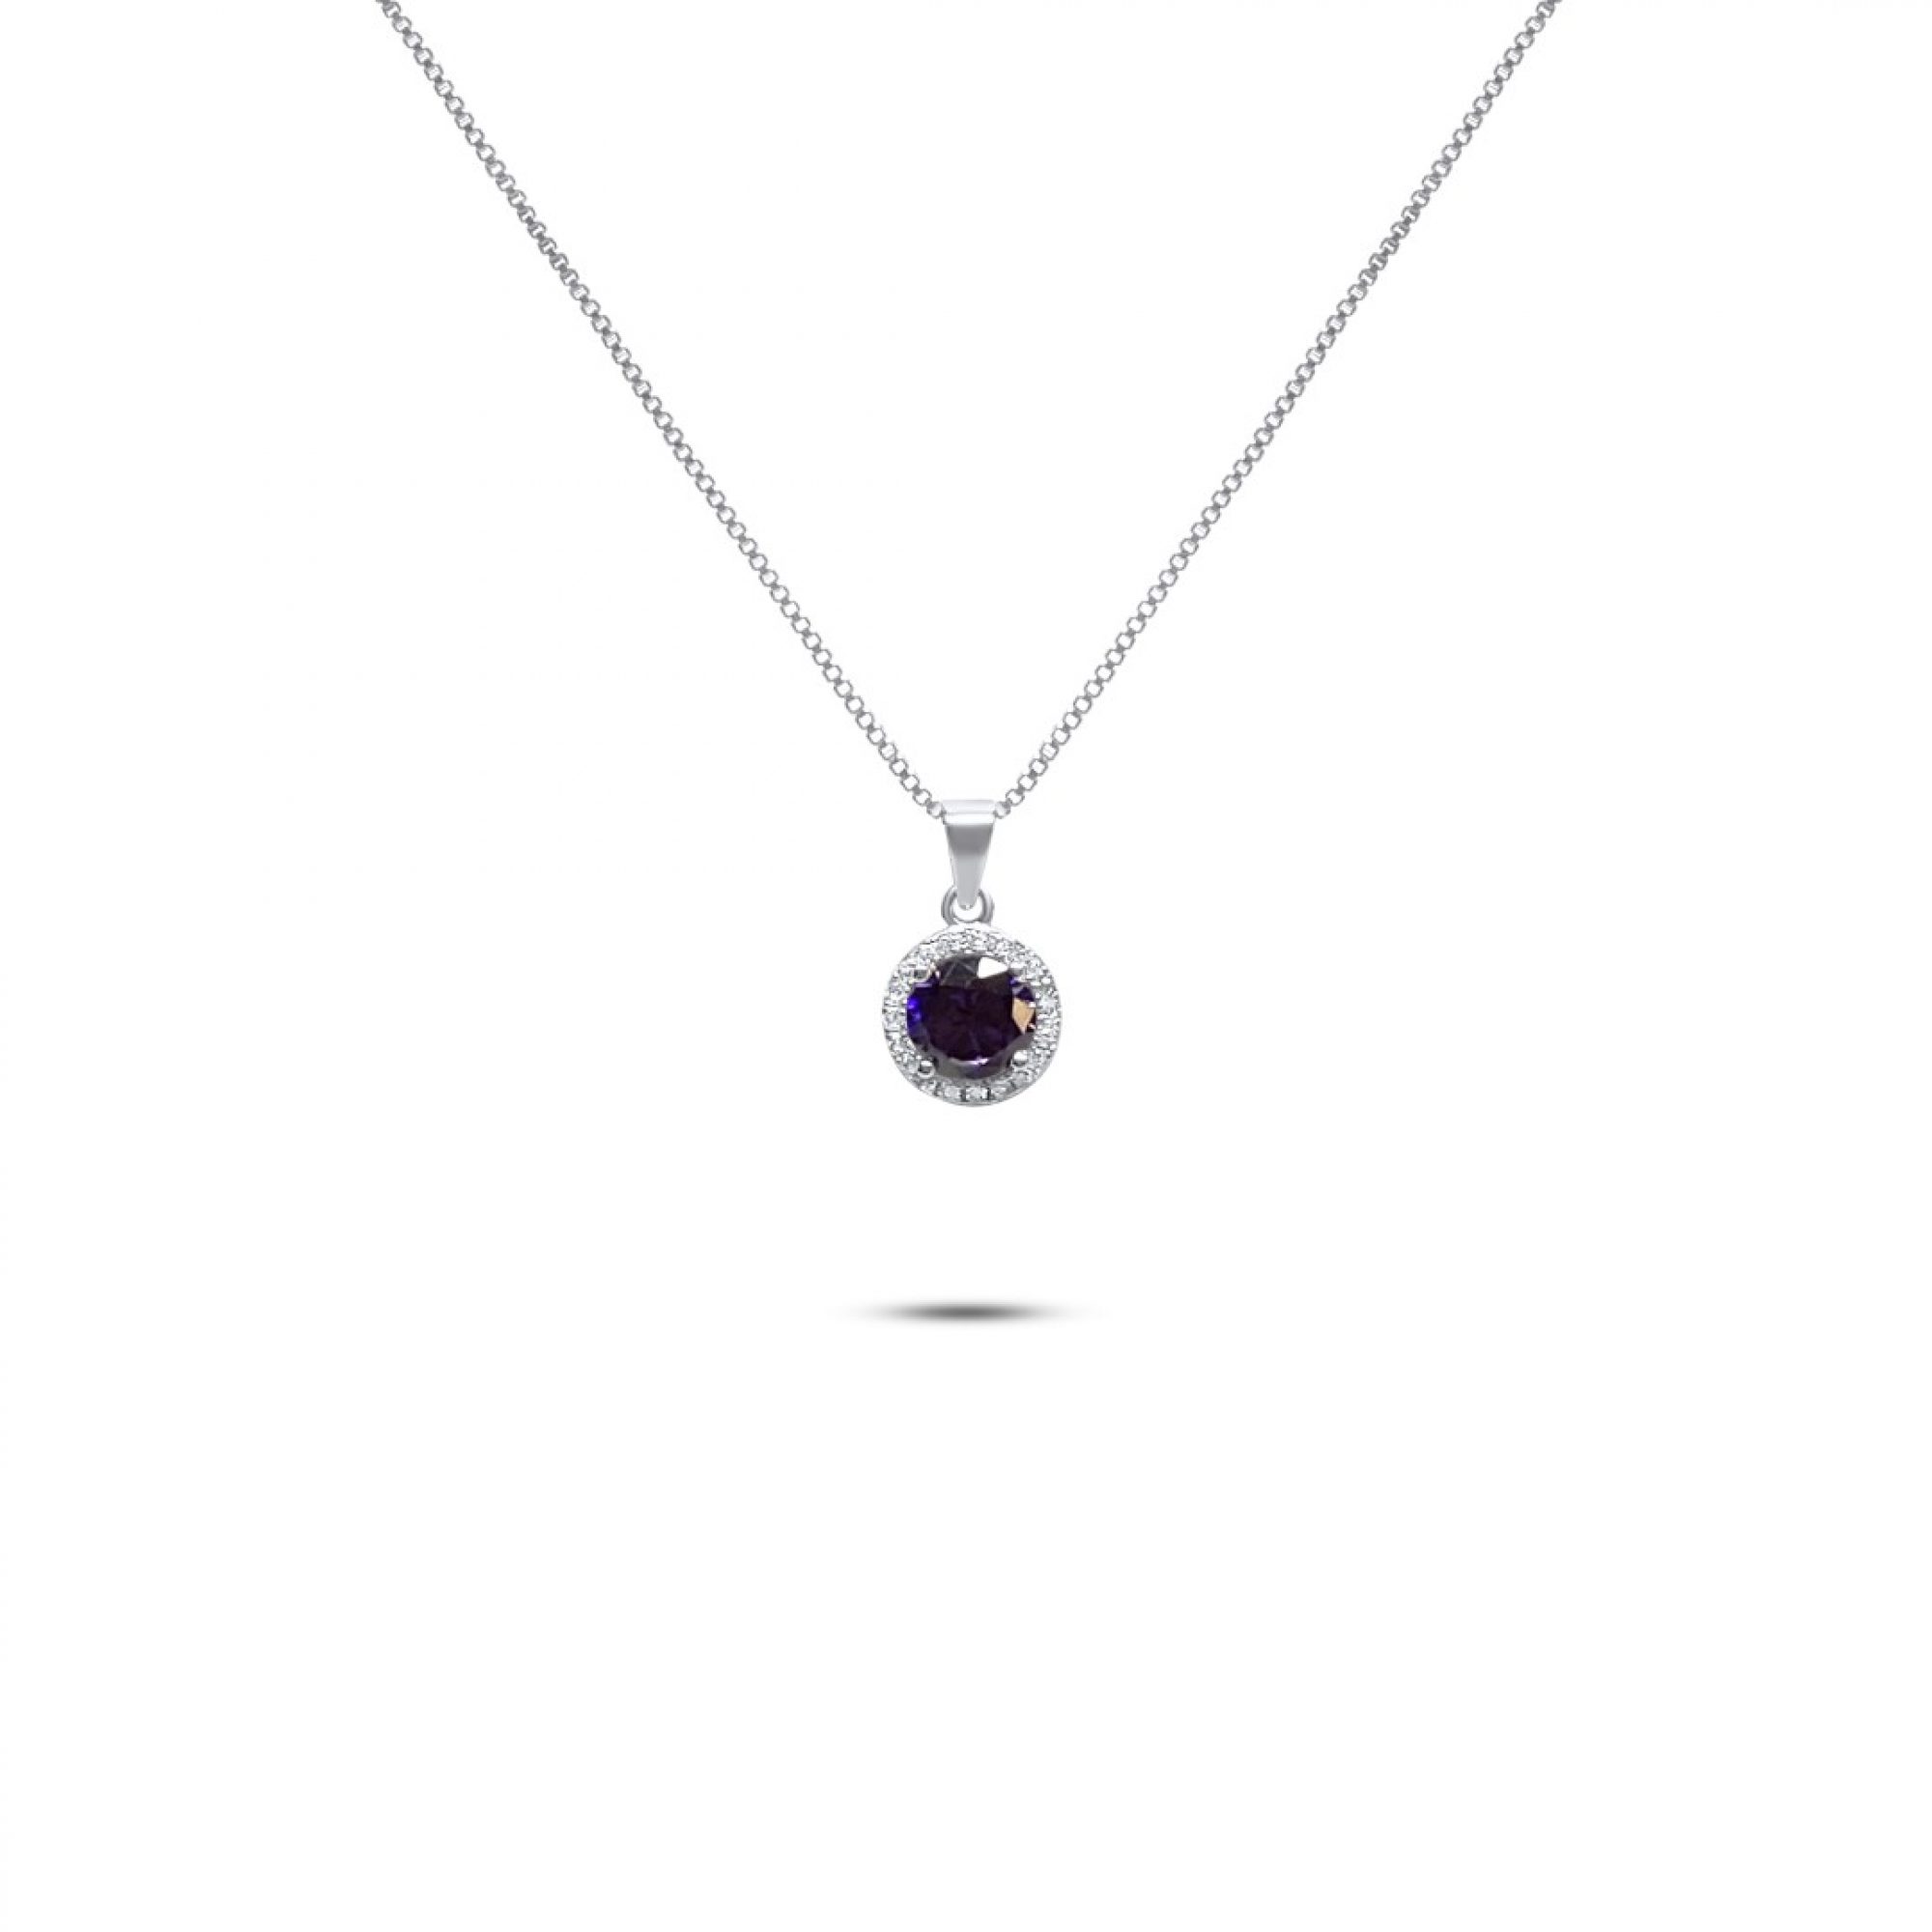 Necklace with amethyst and zircon stones 